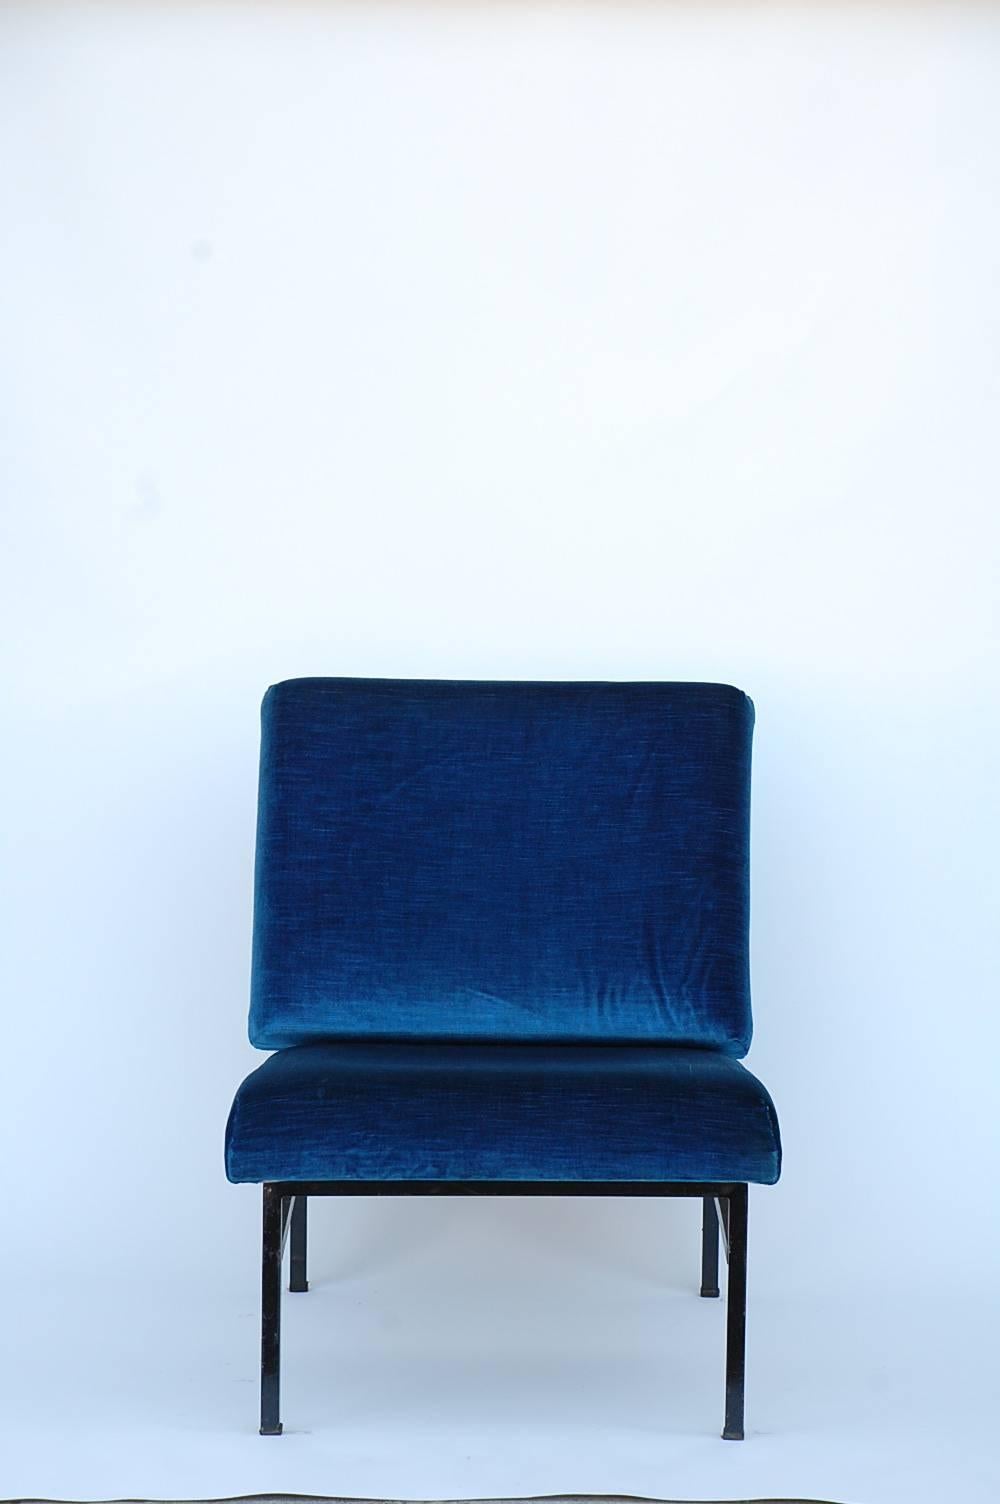 The back and seat inclination of the 'Déclive' slipper chair are designed to promote the most comfortable seating position.